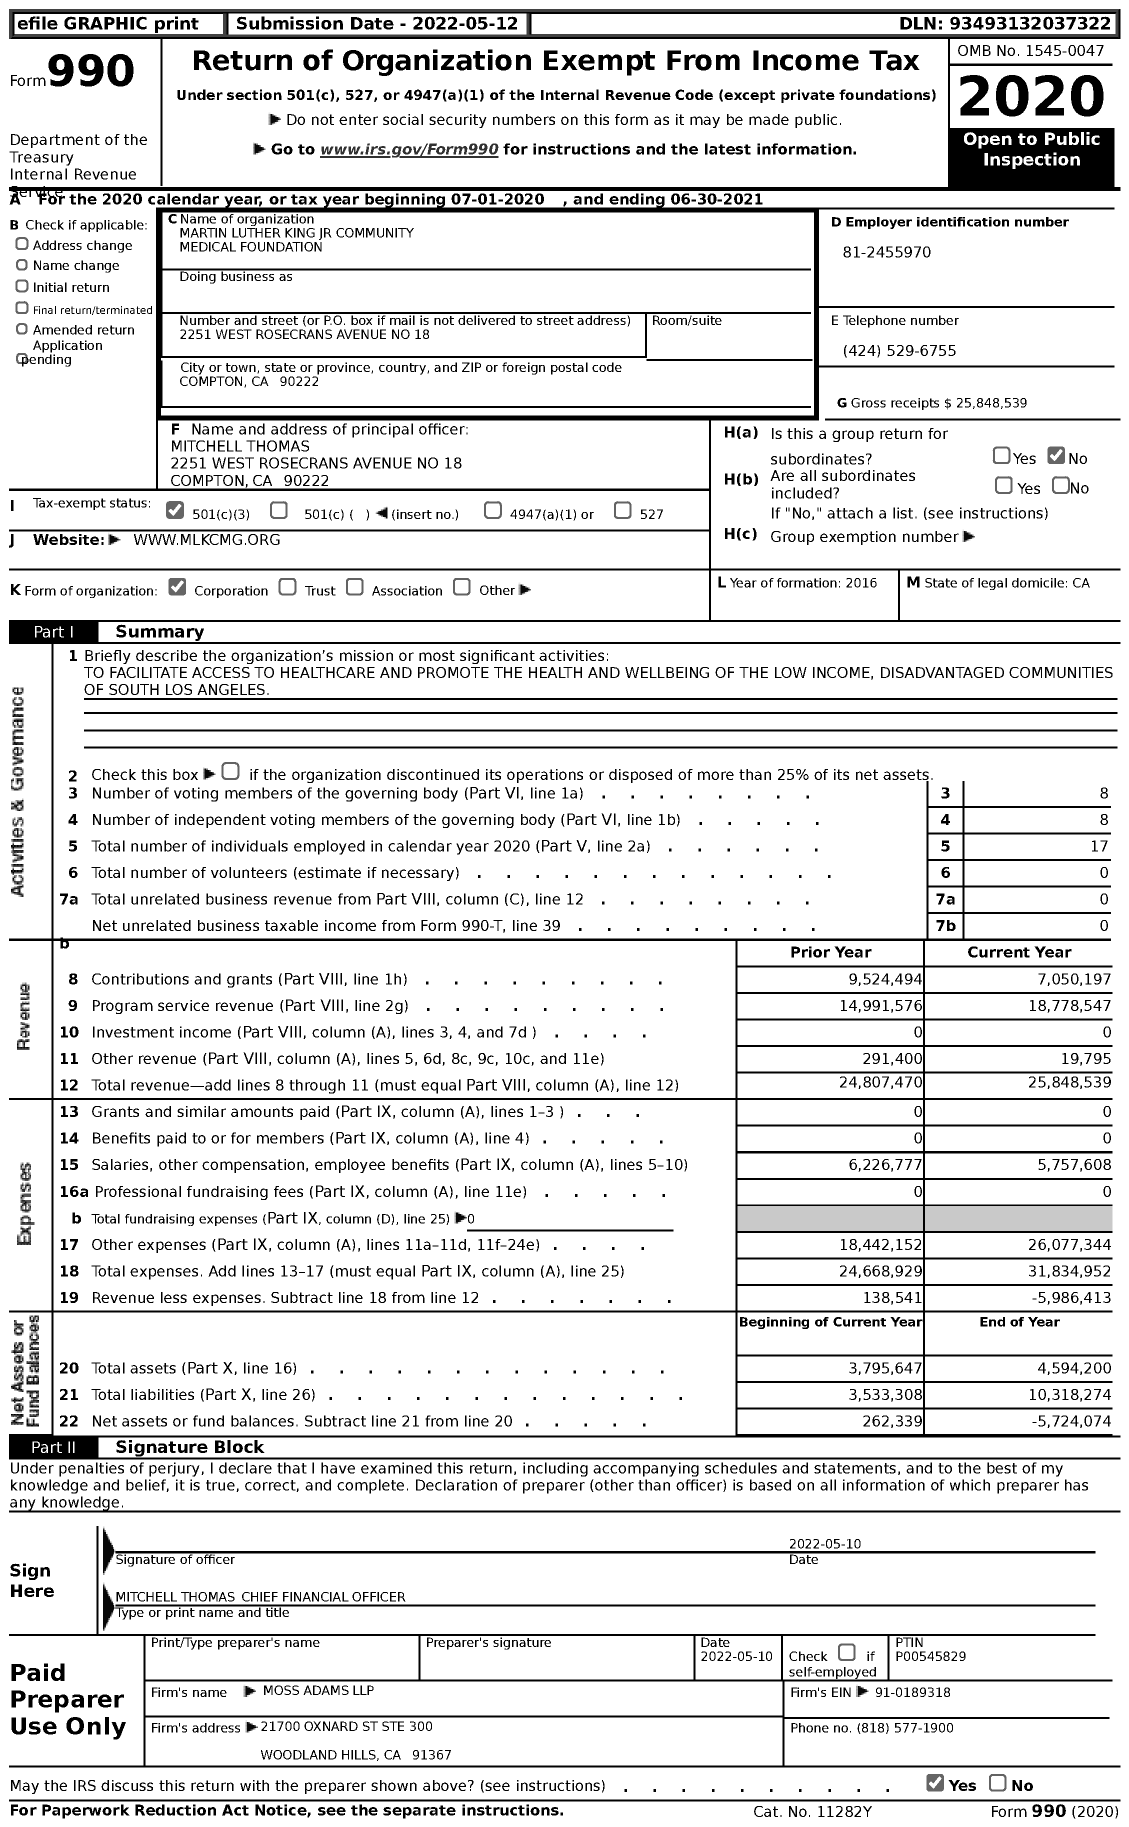 Image of first page of 2020 Form 990 for Martin Luther King Jr Community Medical Foundation